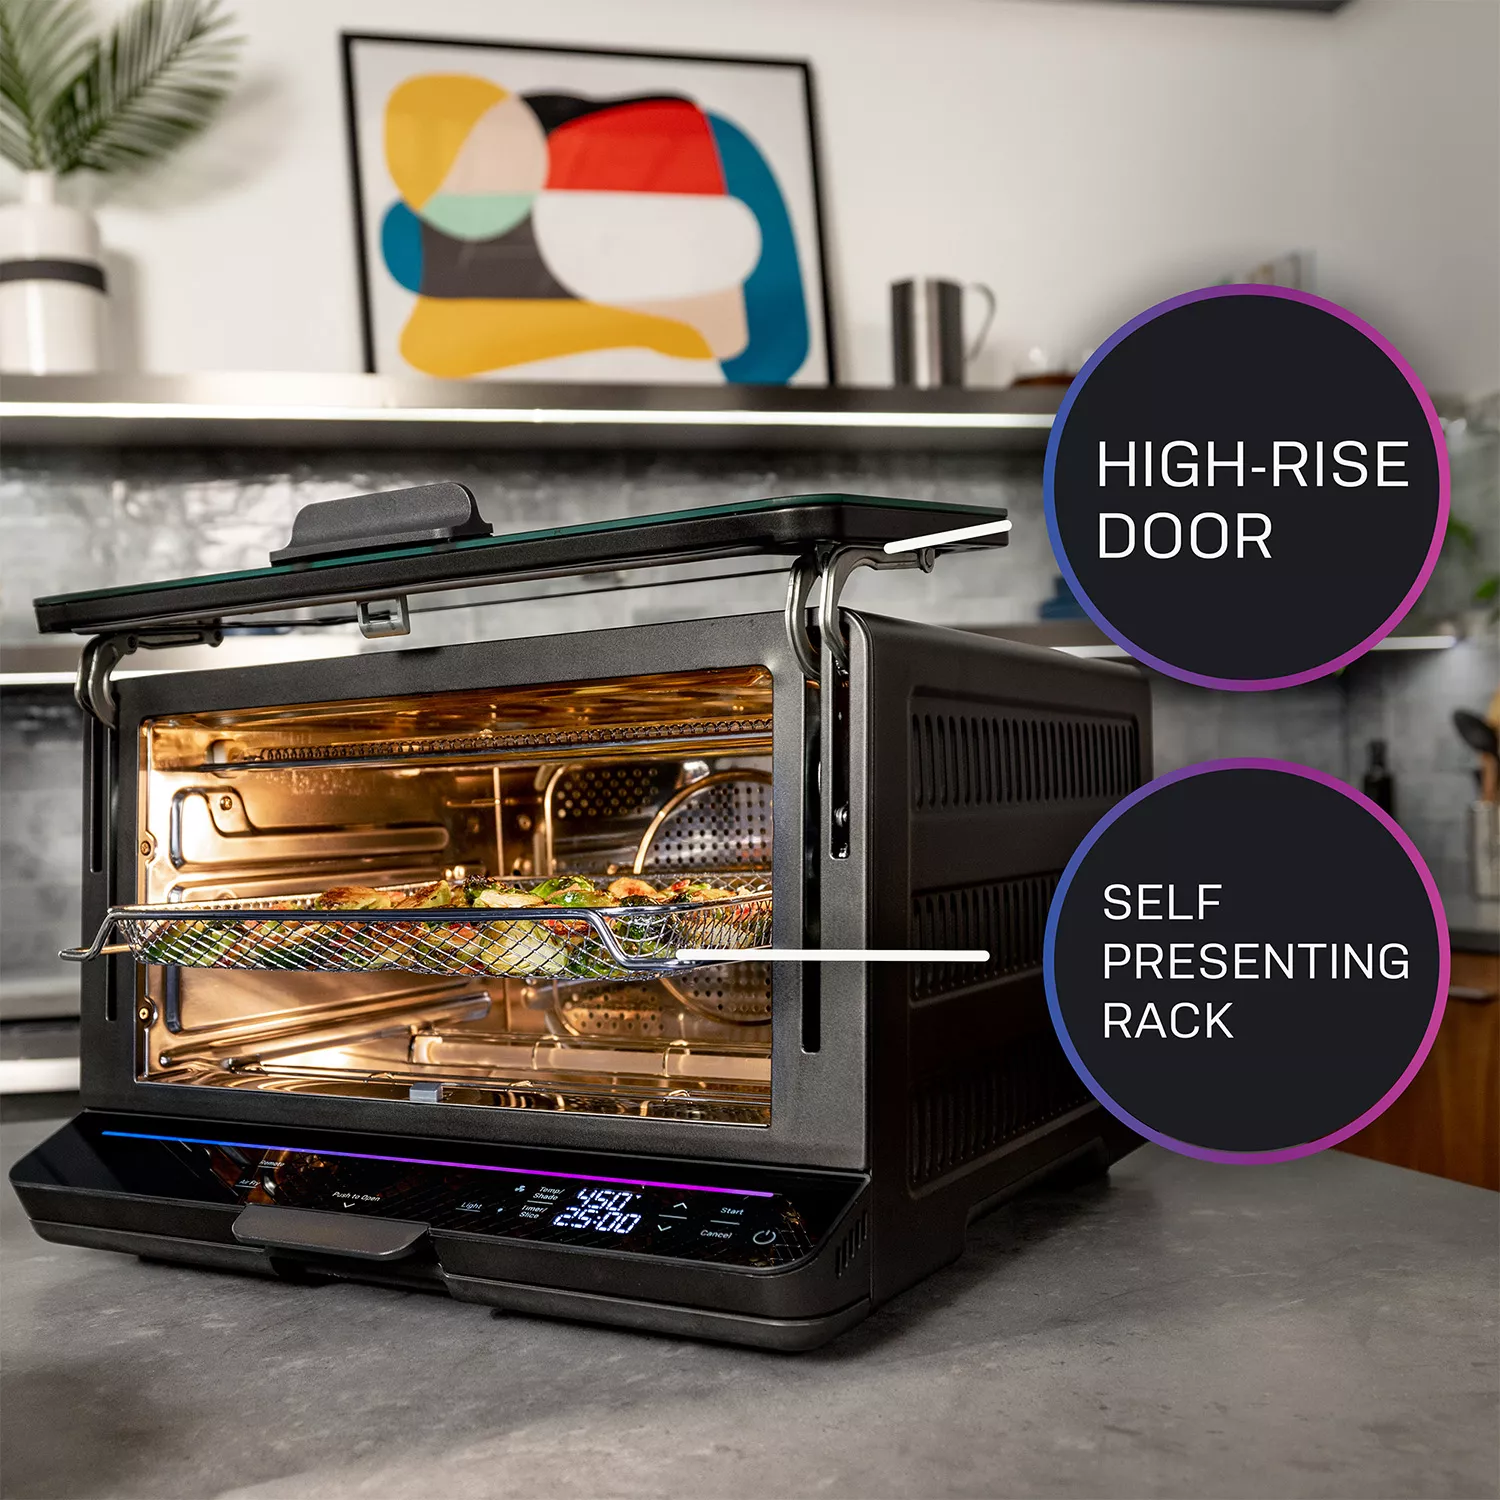 GE Profile™ Smart Oven with No Preheat